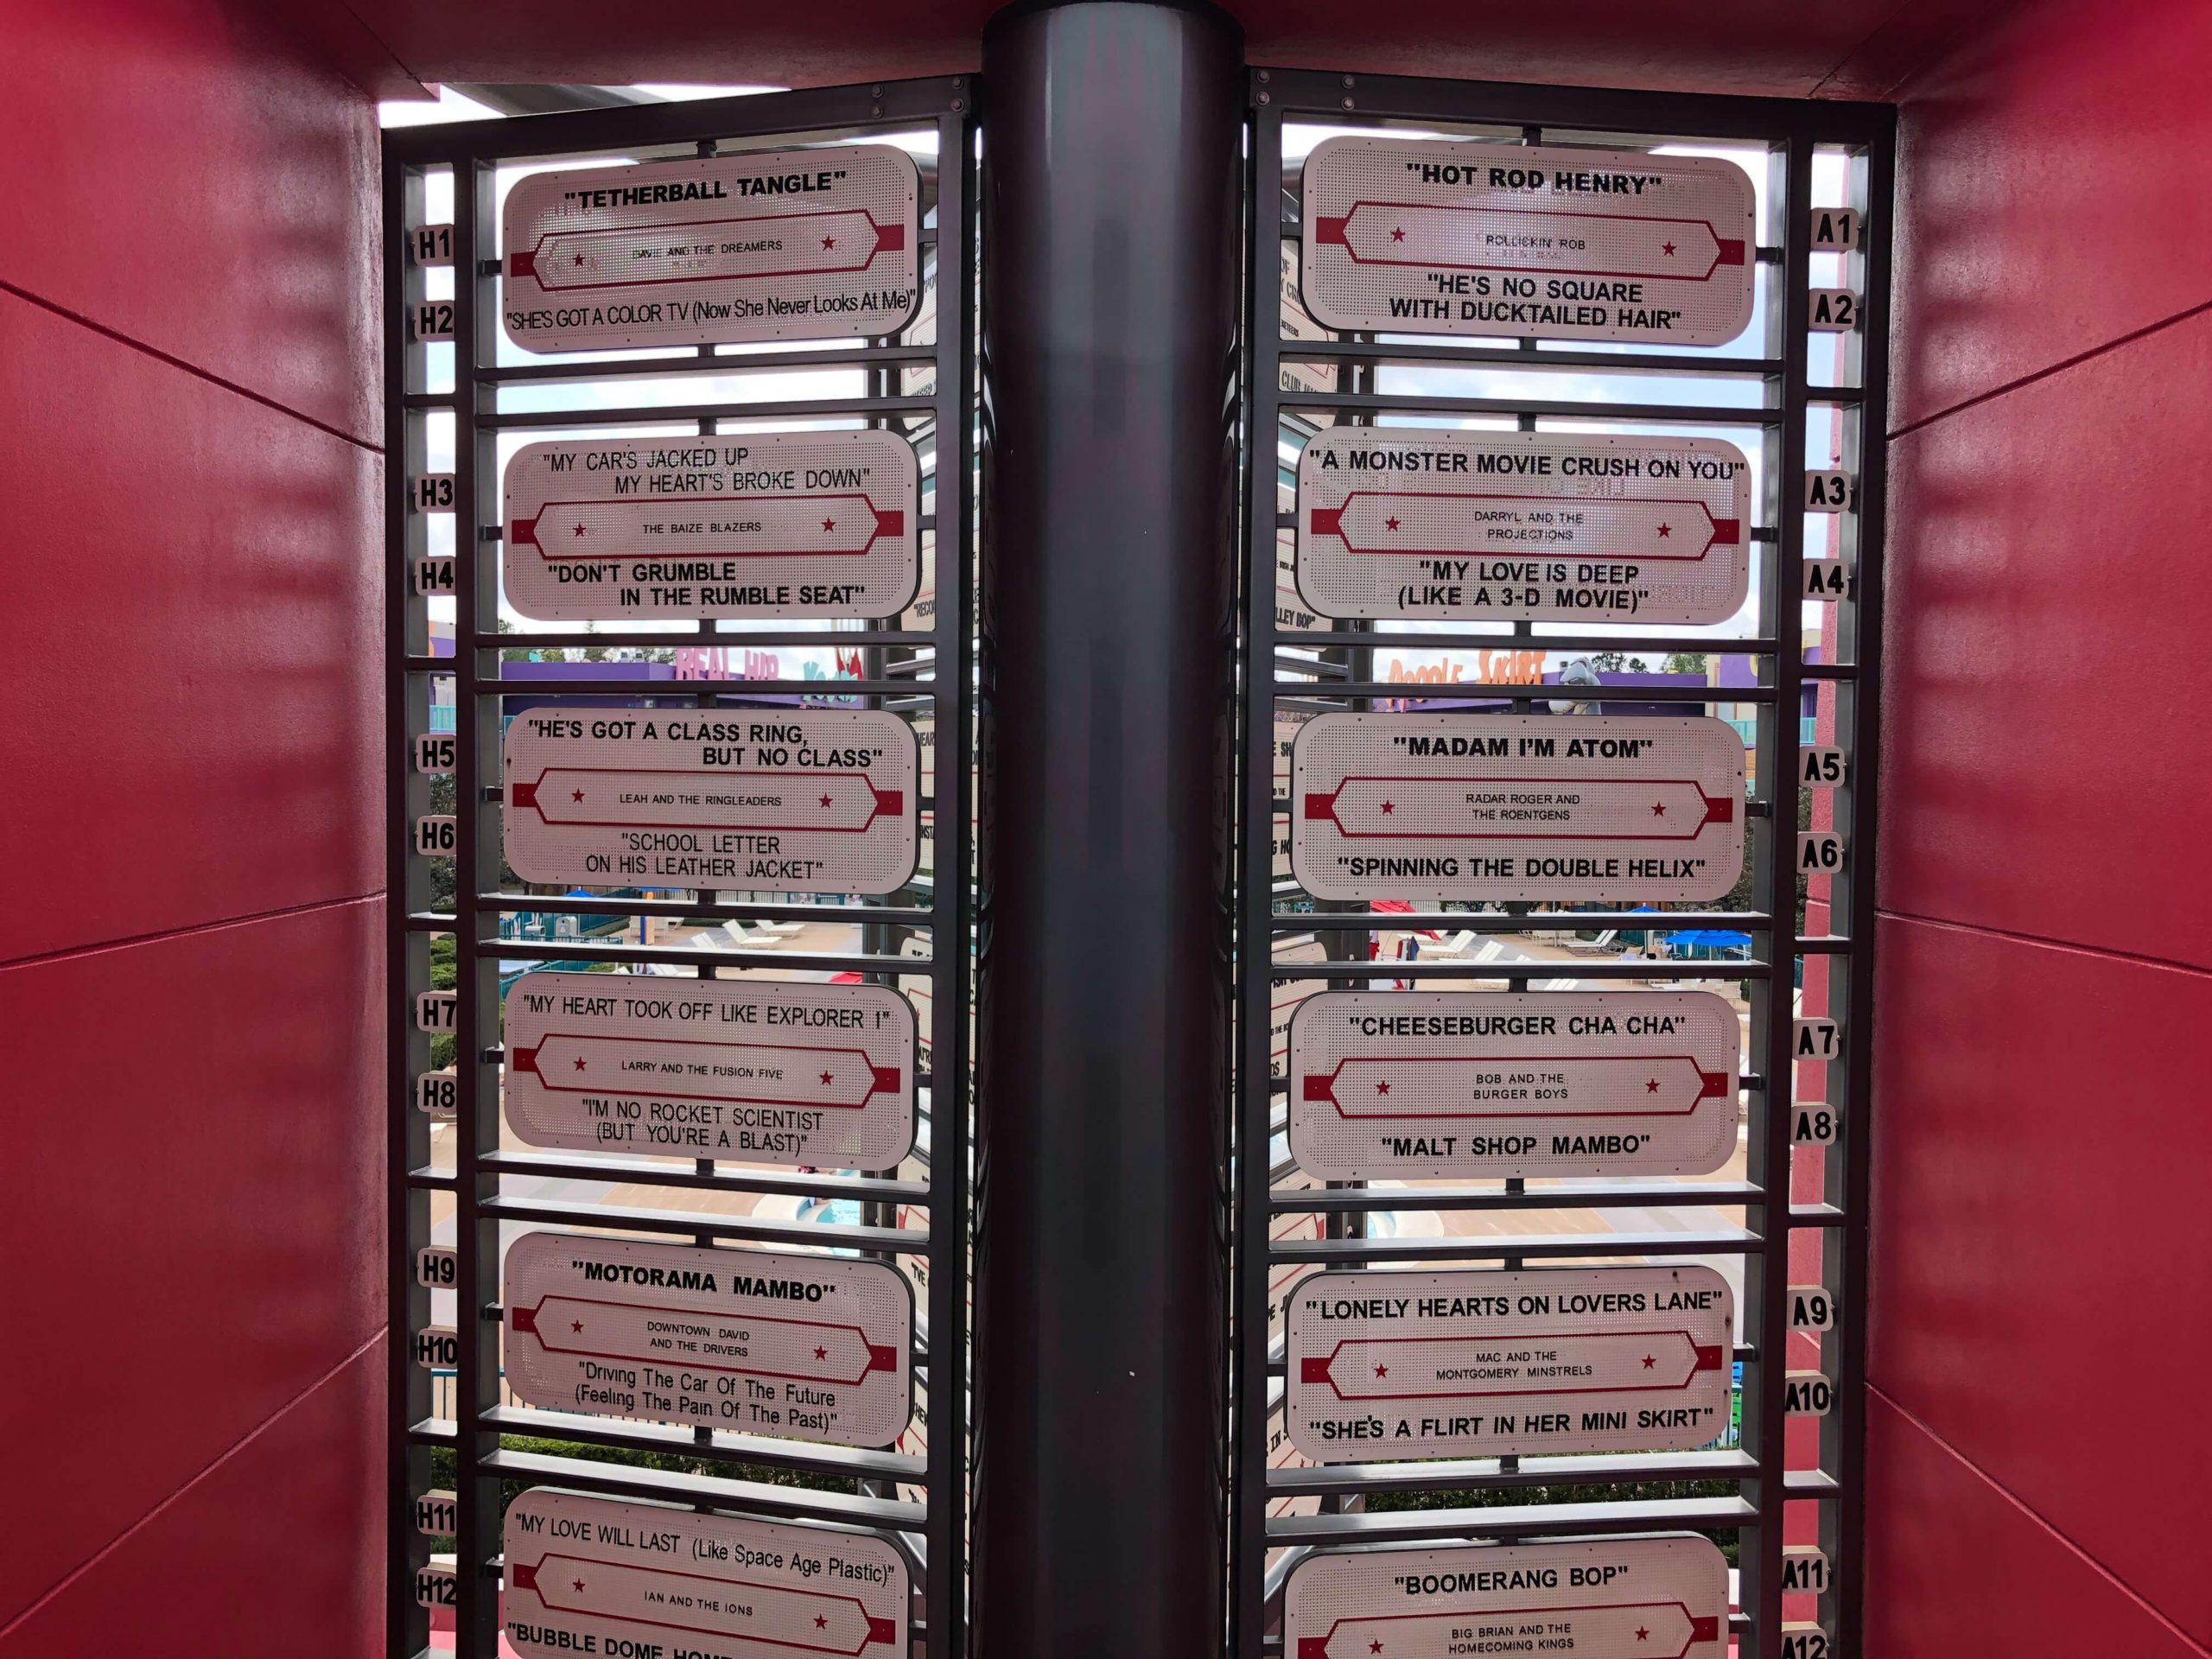 a close-up of a gigantic jukebox reveals names of songs like "Cheeseburger Cha Cha" and Lonely Hearts on Lovers Lane"